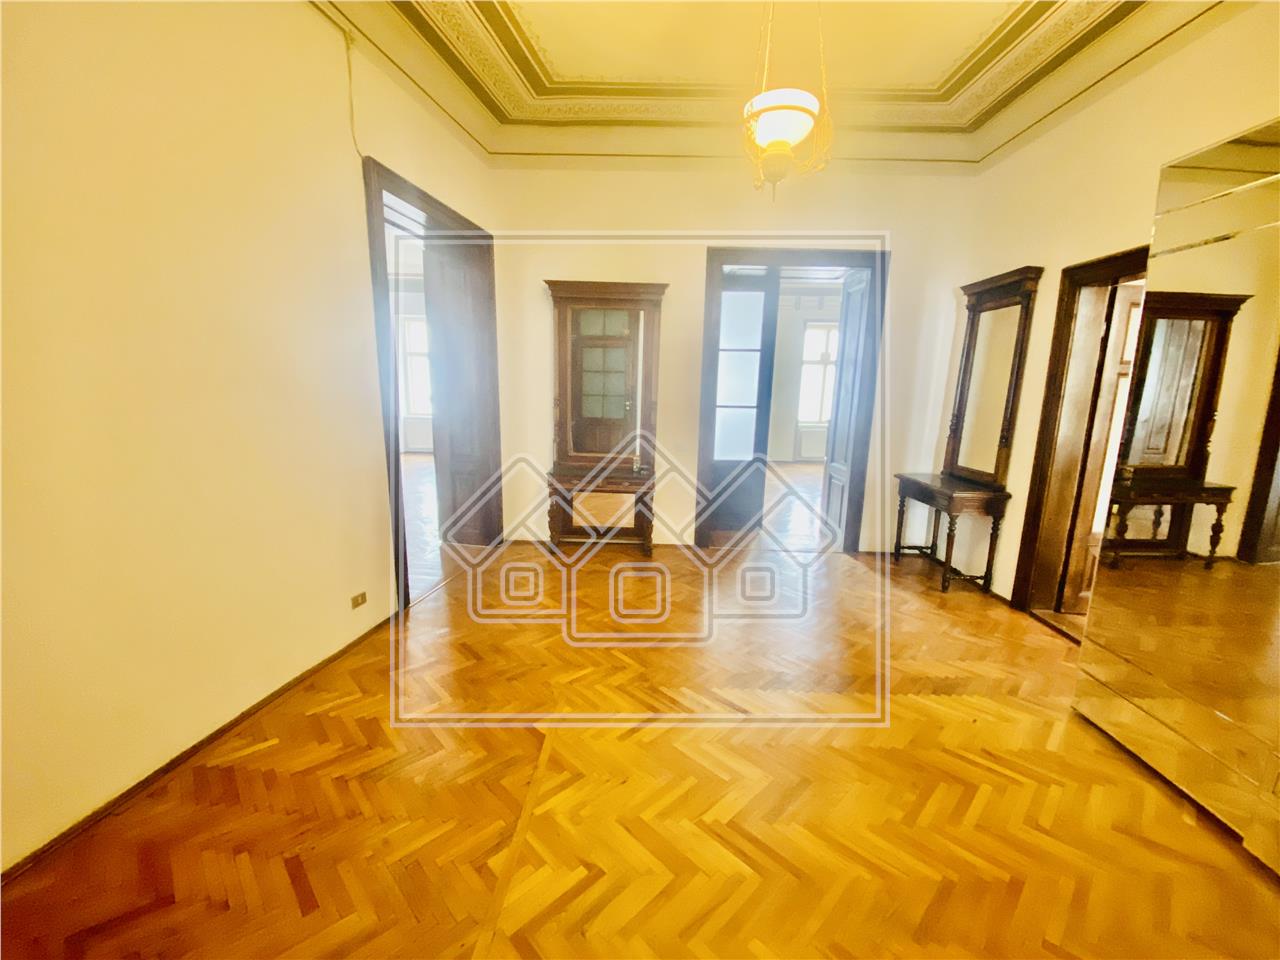 Apartment for sale in Sibiu - 3 rooms - ULTRACENTRAL - Great property